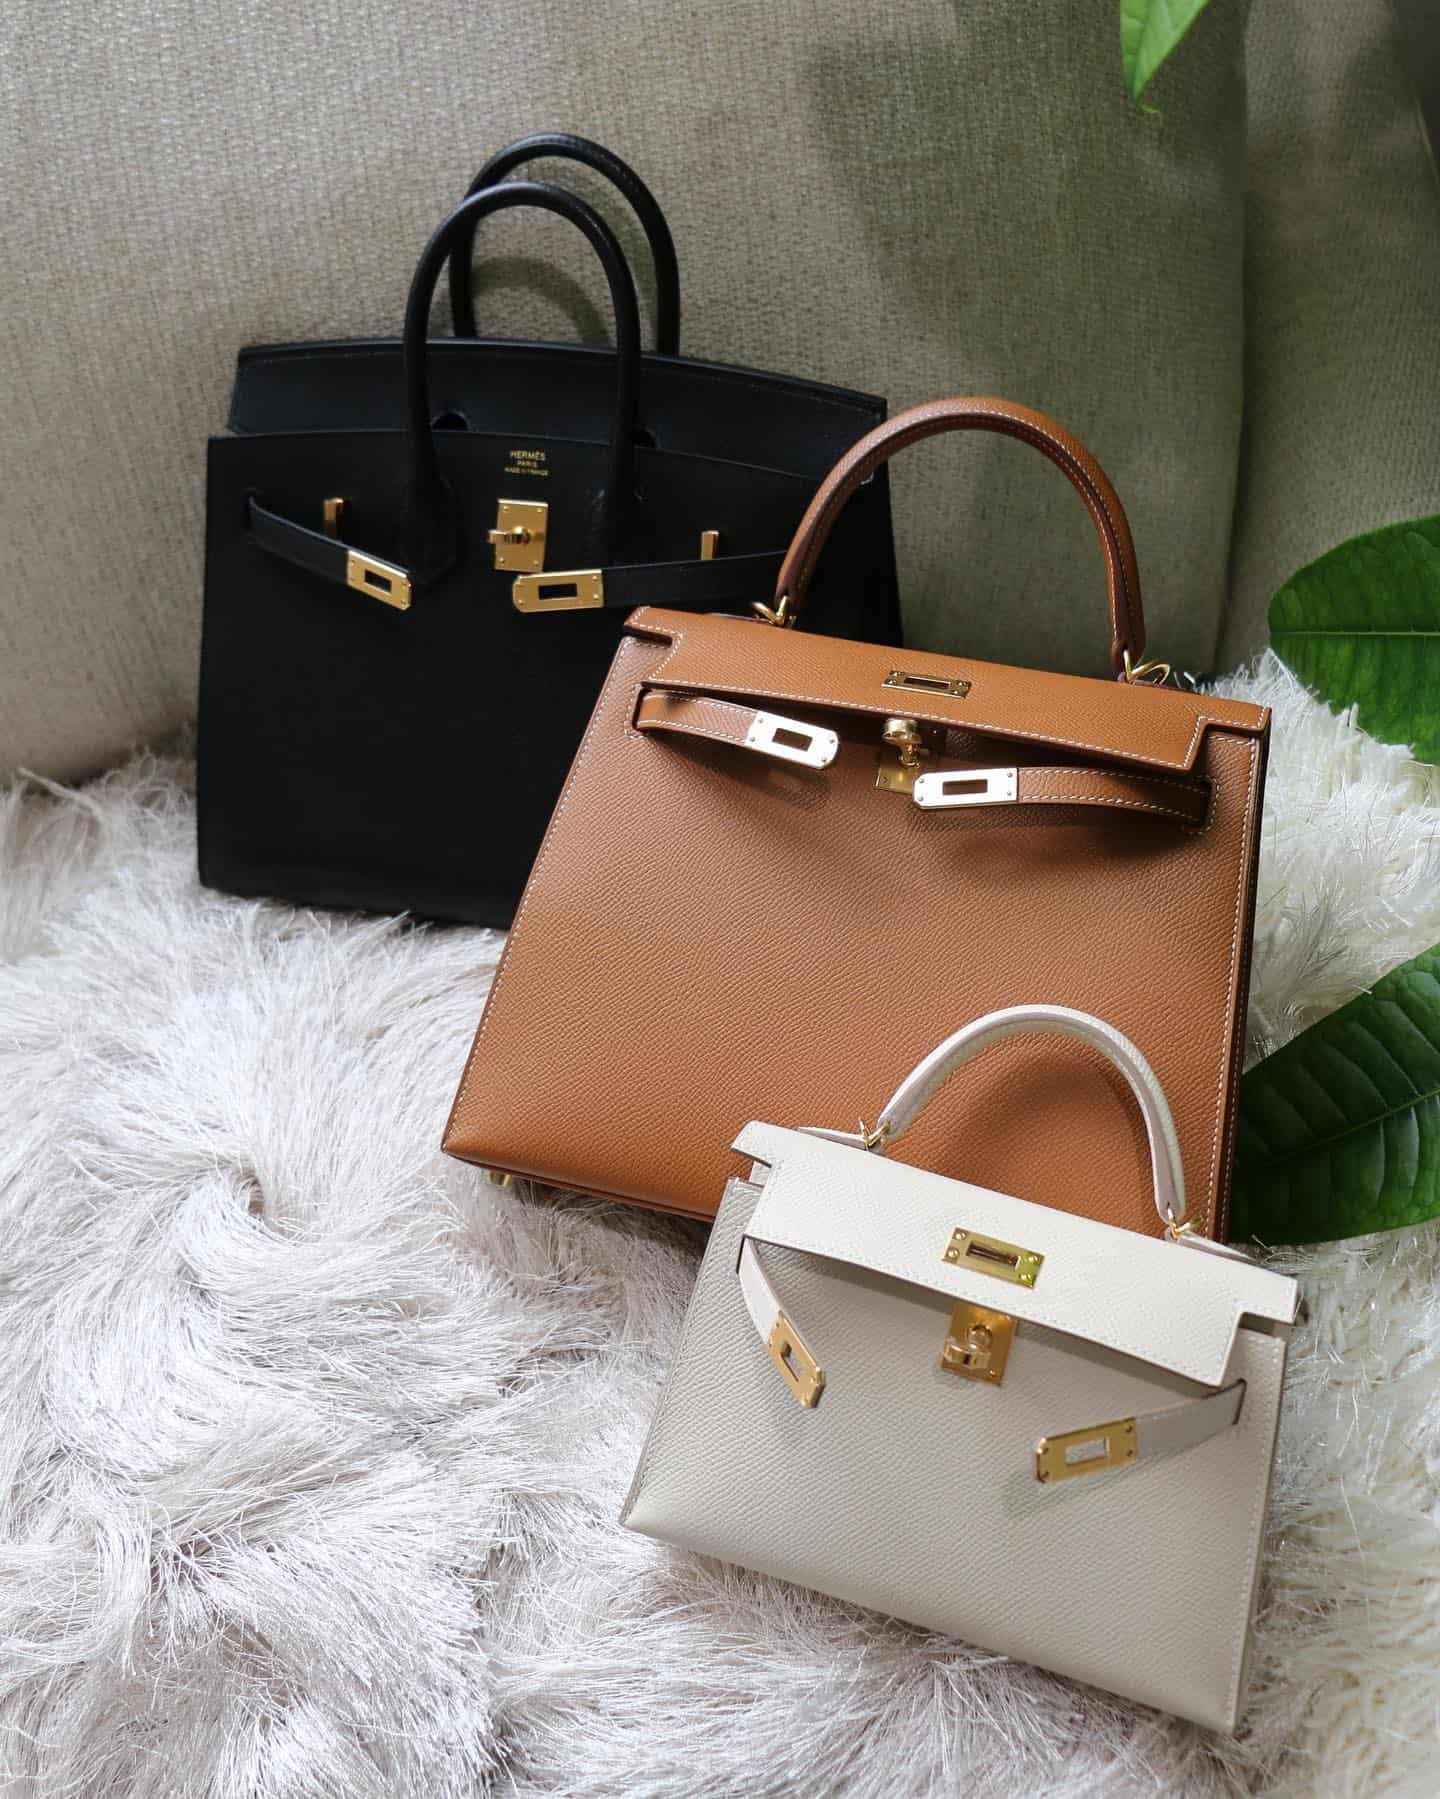 Which Hermes bags color are difficult to purchase